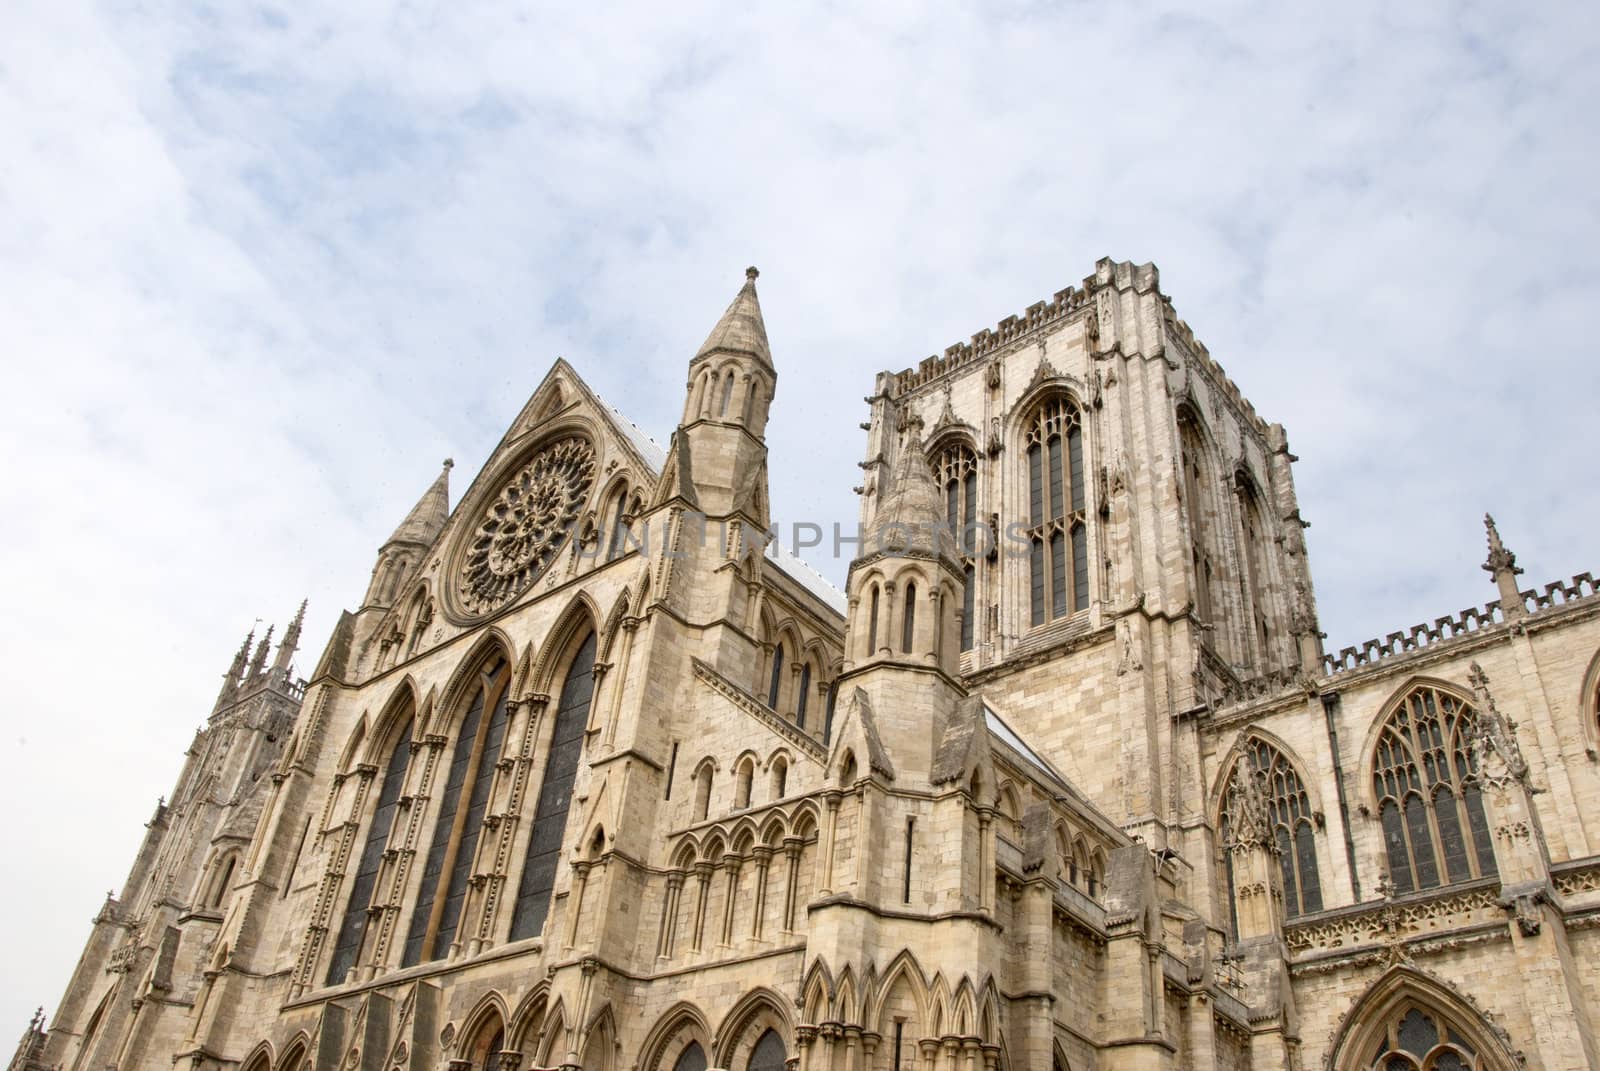 York Minster South View by d40xboy